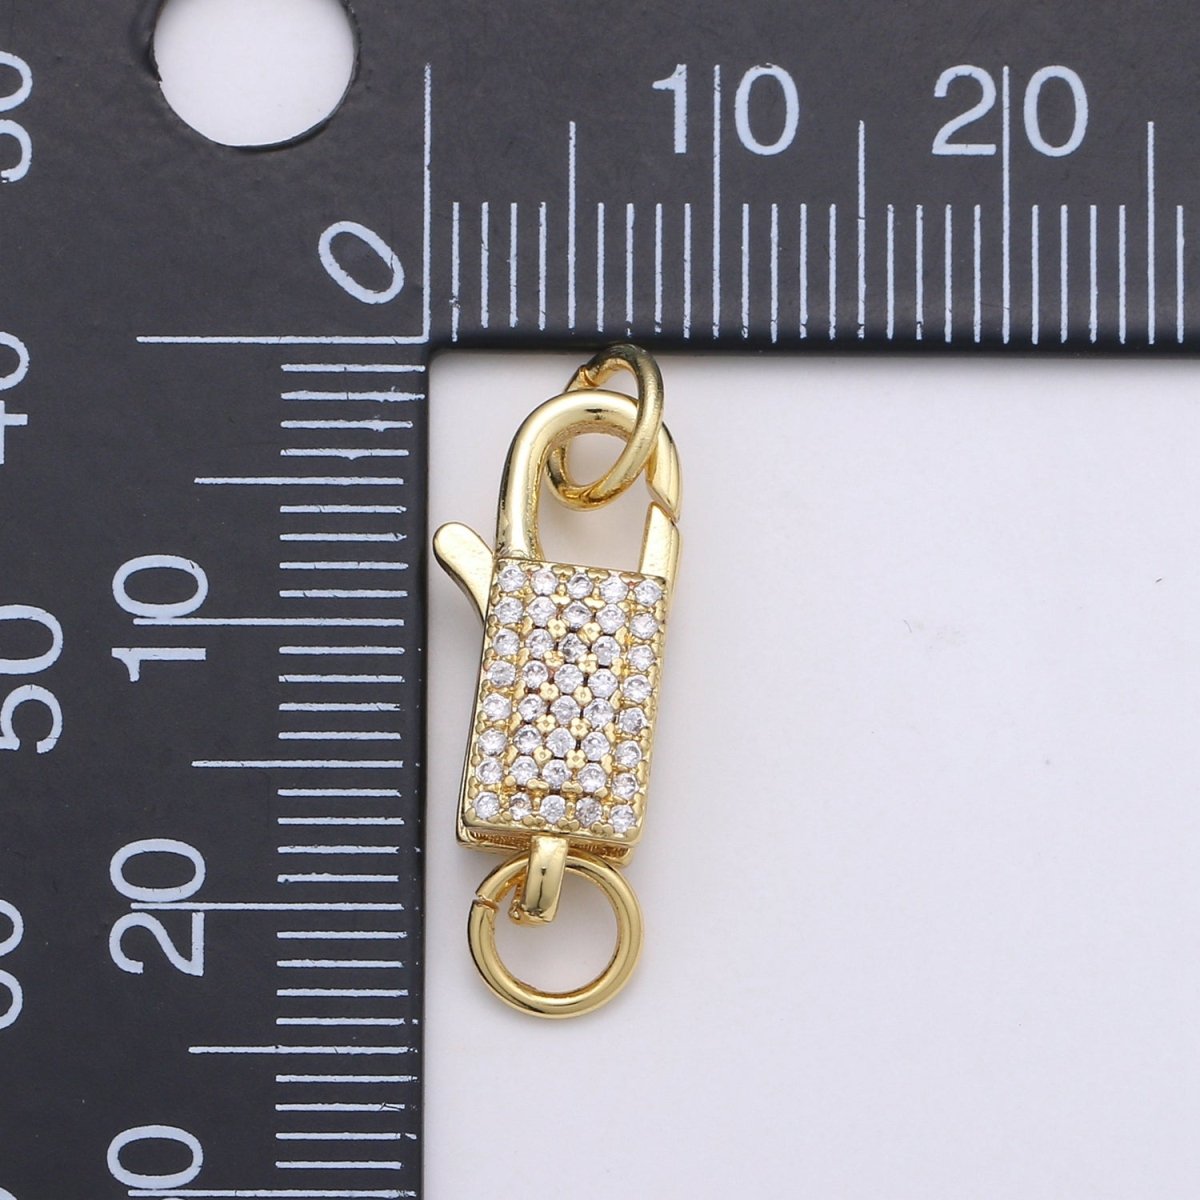 Lobster Clasp with Rings Rectangular Jewelry End Clasp Charms Supplies For DIY Jewelry Making K-730 - DLUXCA